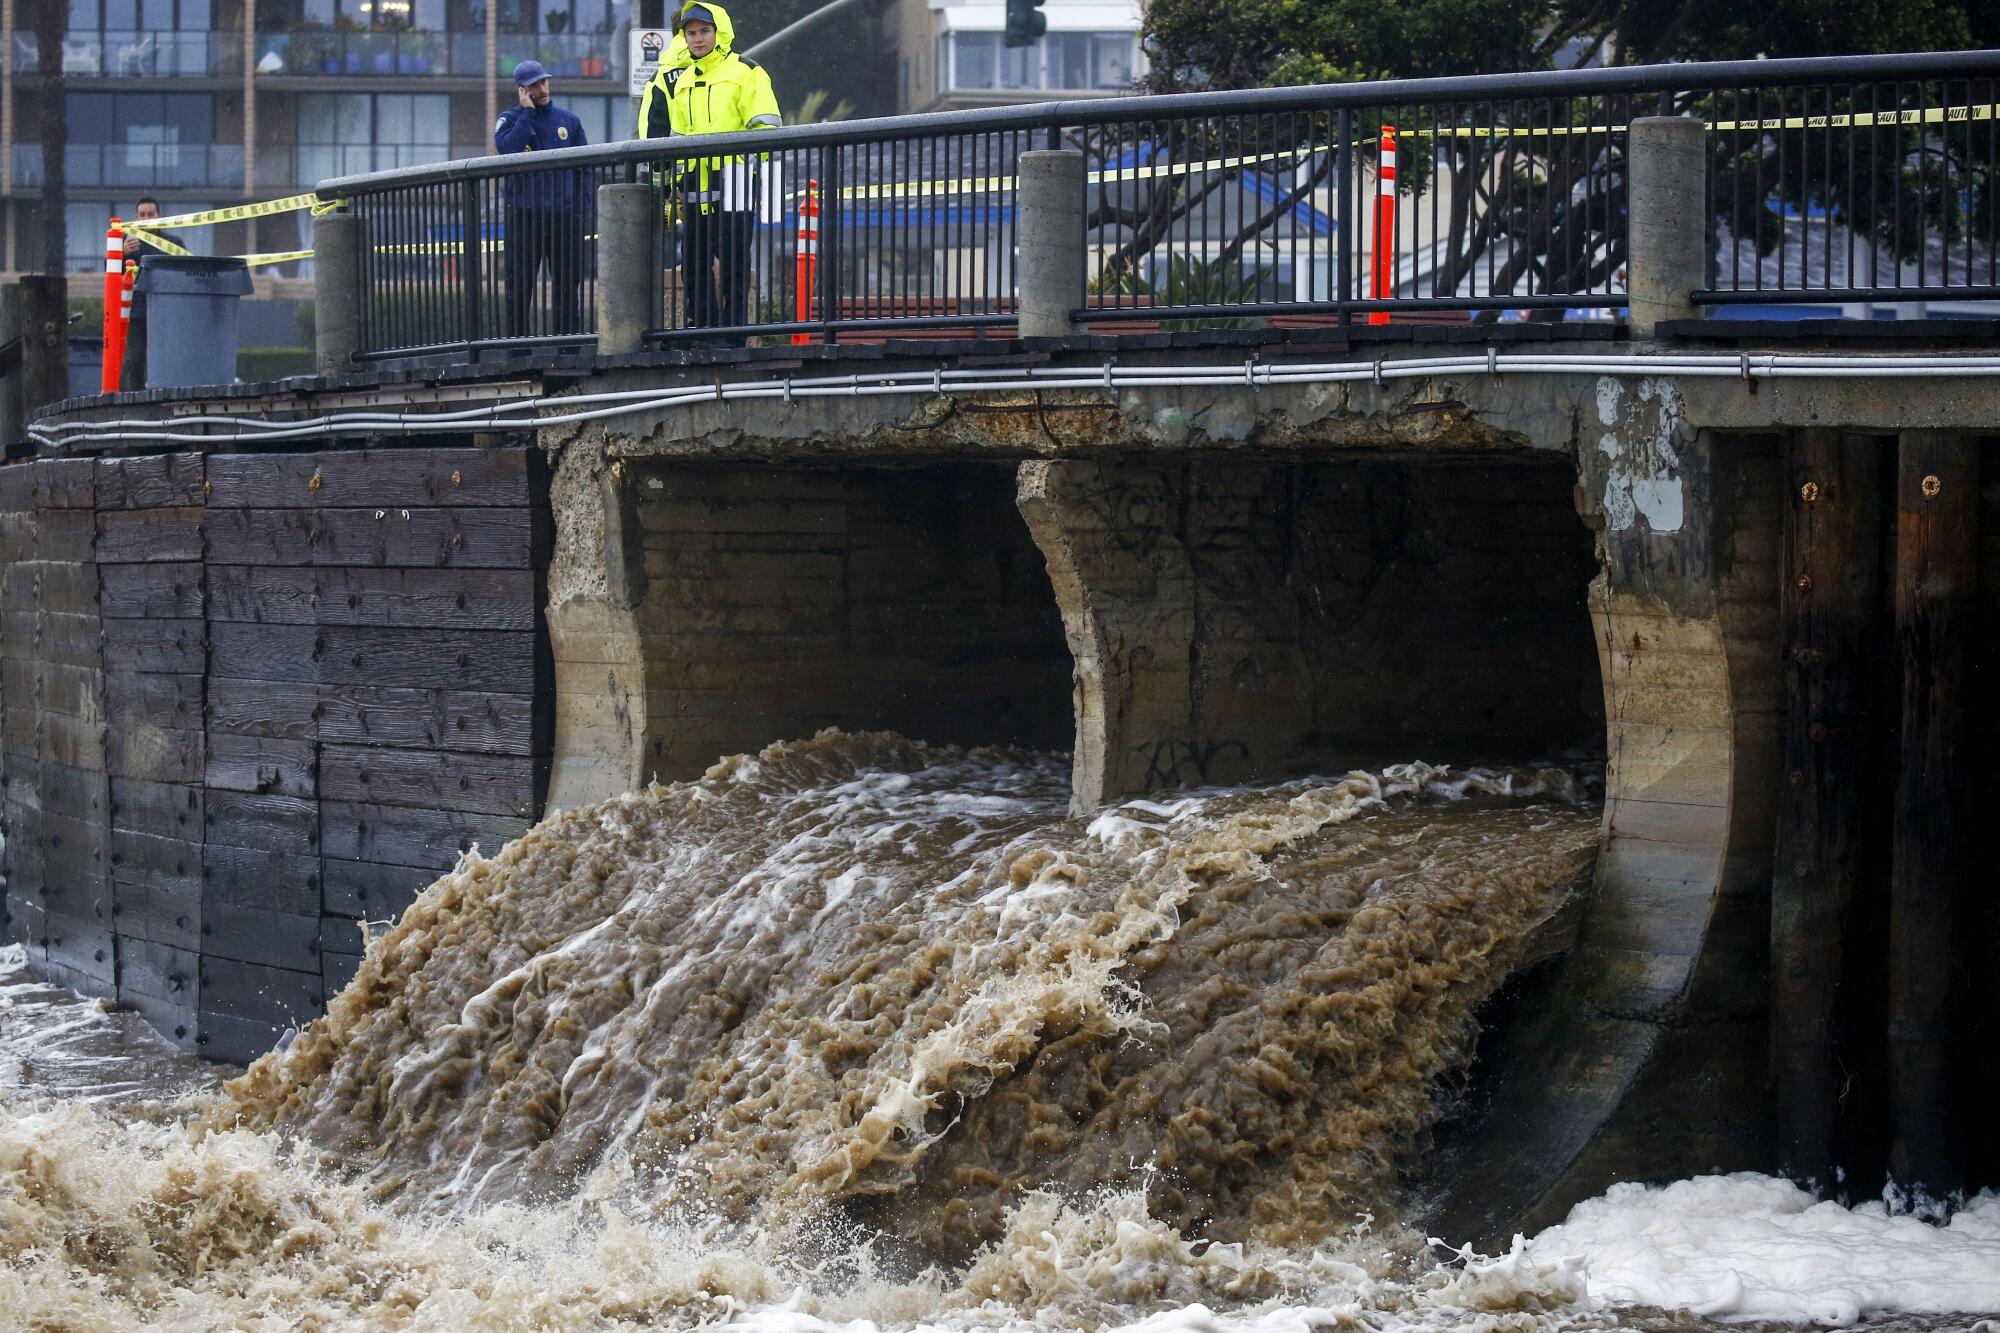 Stormwater falls into the ocean from a drainage canal as passersby watch.